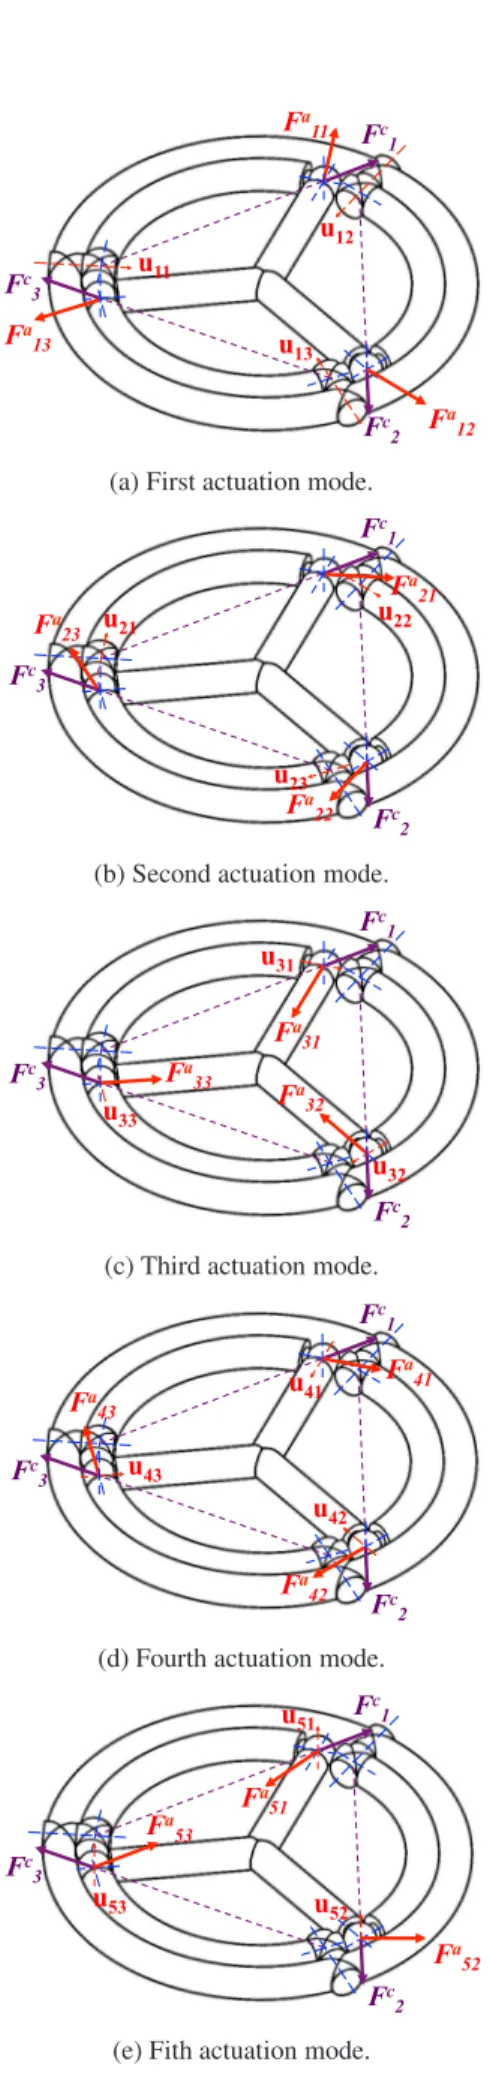 Fig. 10: Constraint and actuation forces of the 3-US parallel manipulator for the five actuation modes.